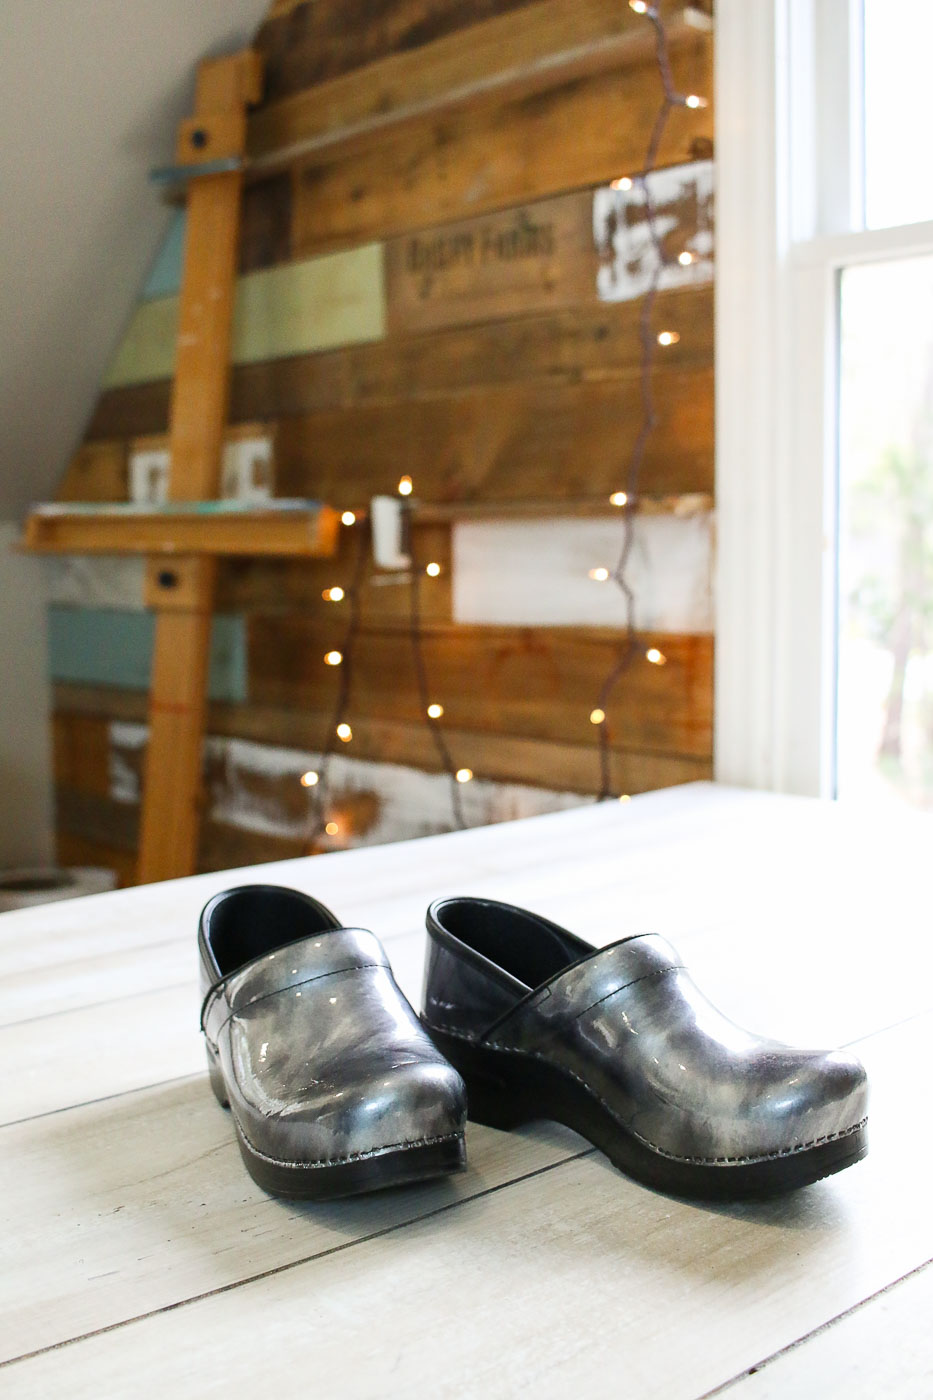 silver clogs on table